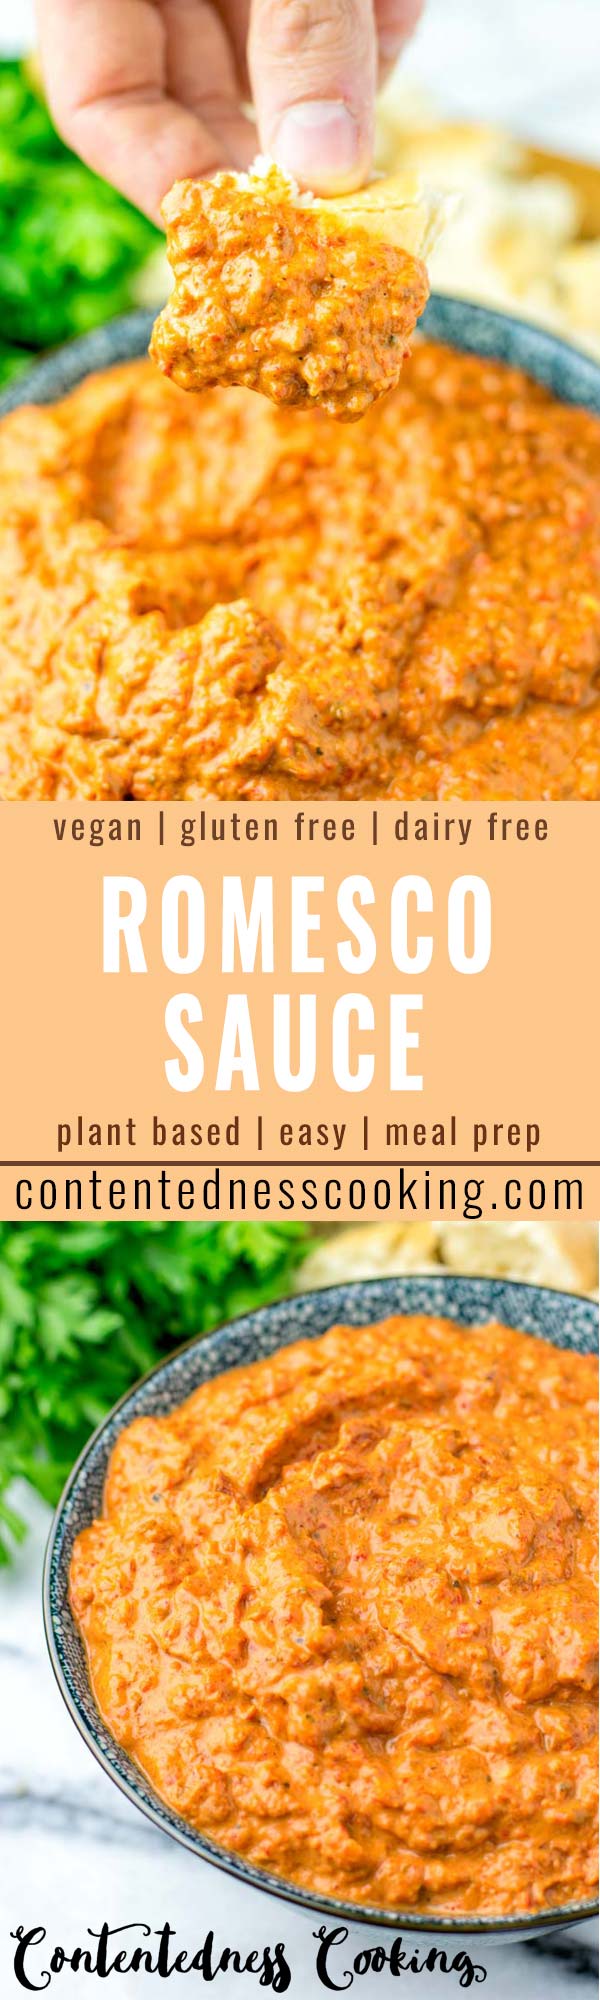 This Romesco Sauce Recipe is full of authentic traditional flavors, made in a vegetarian, even vegan way. It is ready in 5 minutes and so satisfying. Enjoy with bread, over pasta, salads and more. 